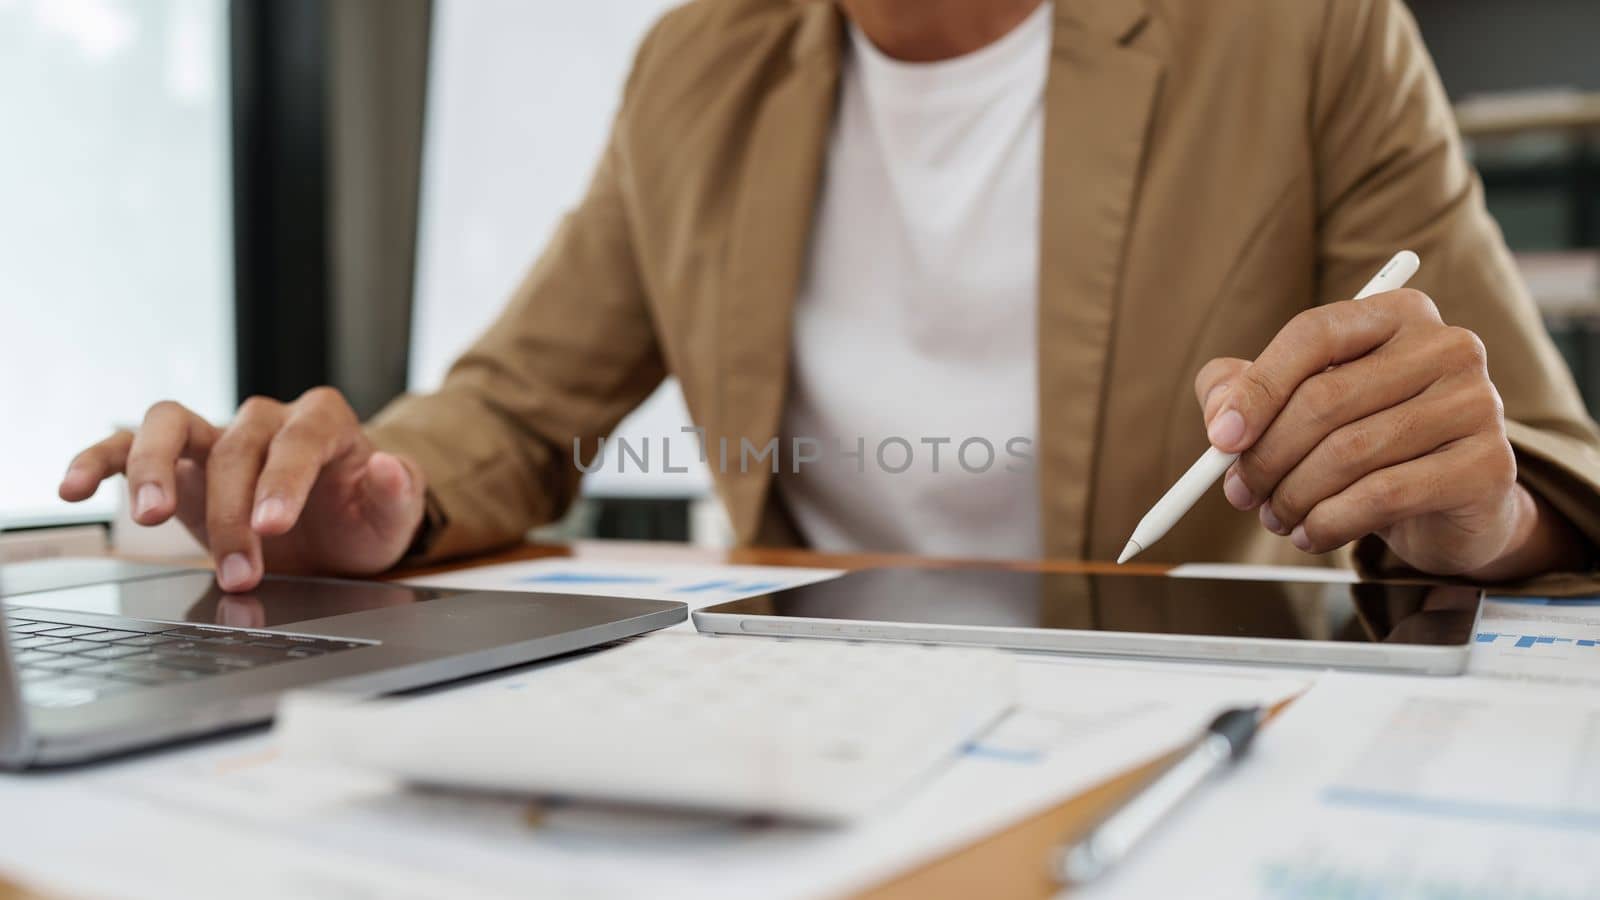 Asian businessman checking information while working with satisfaction on his laptop.